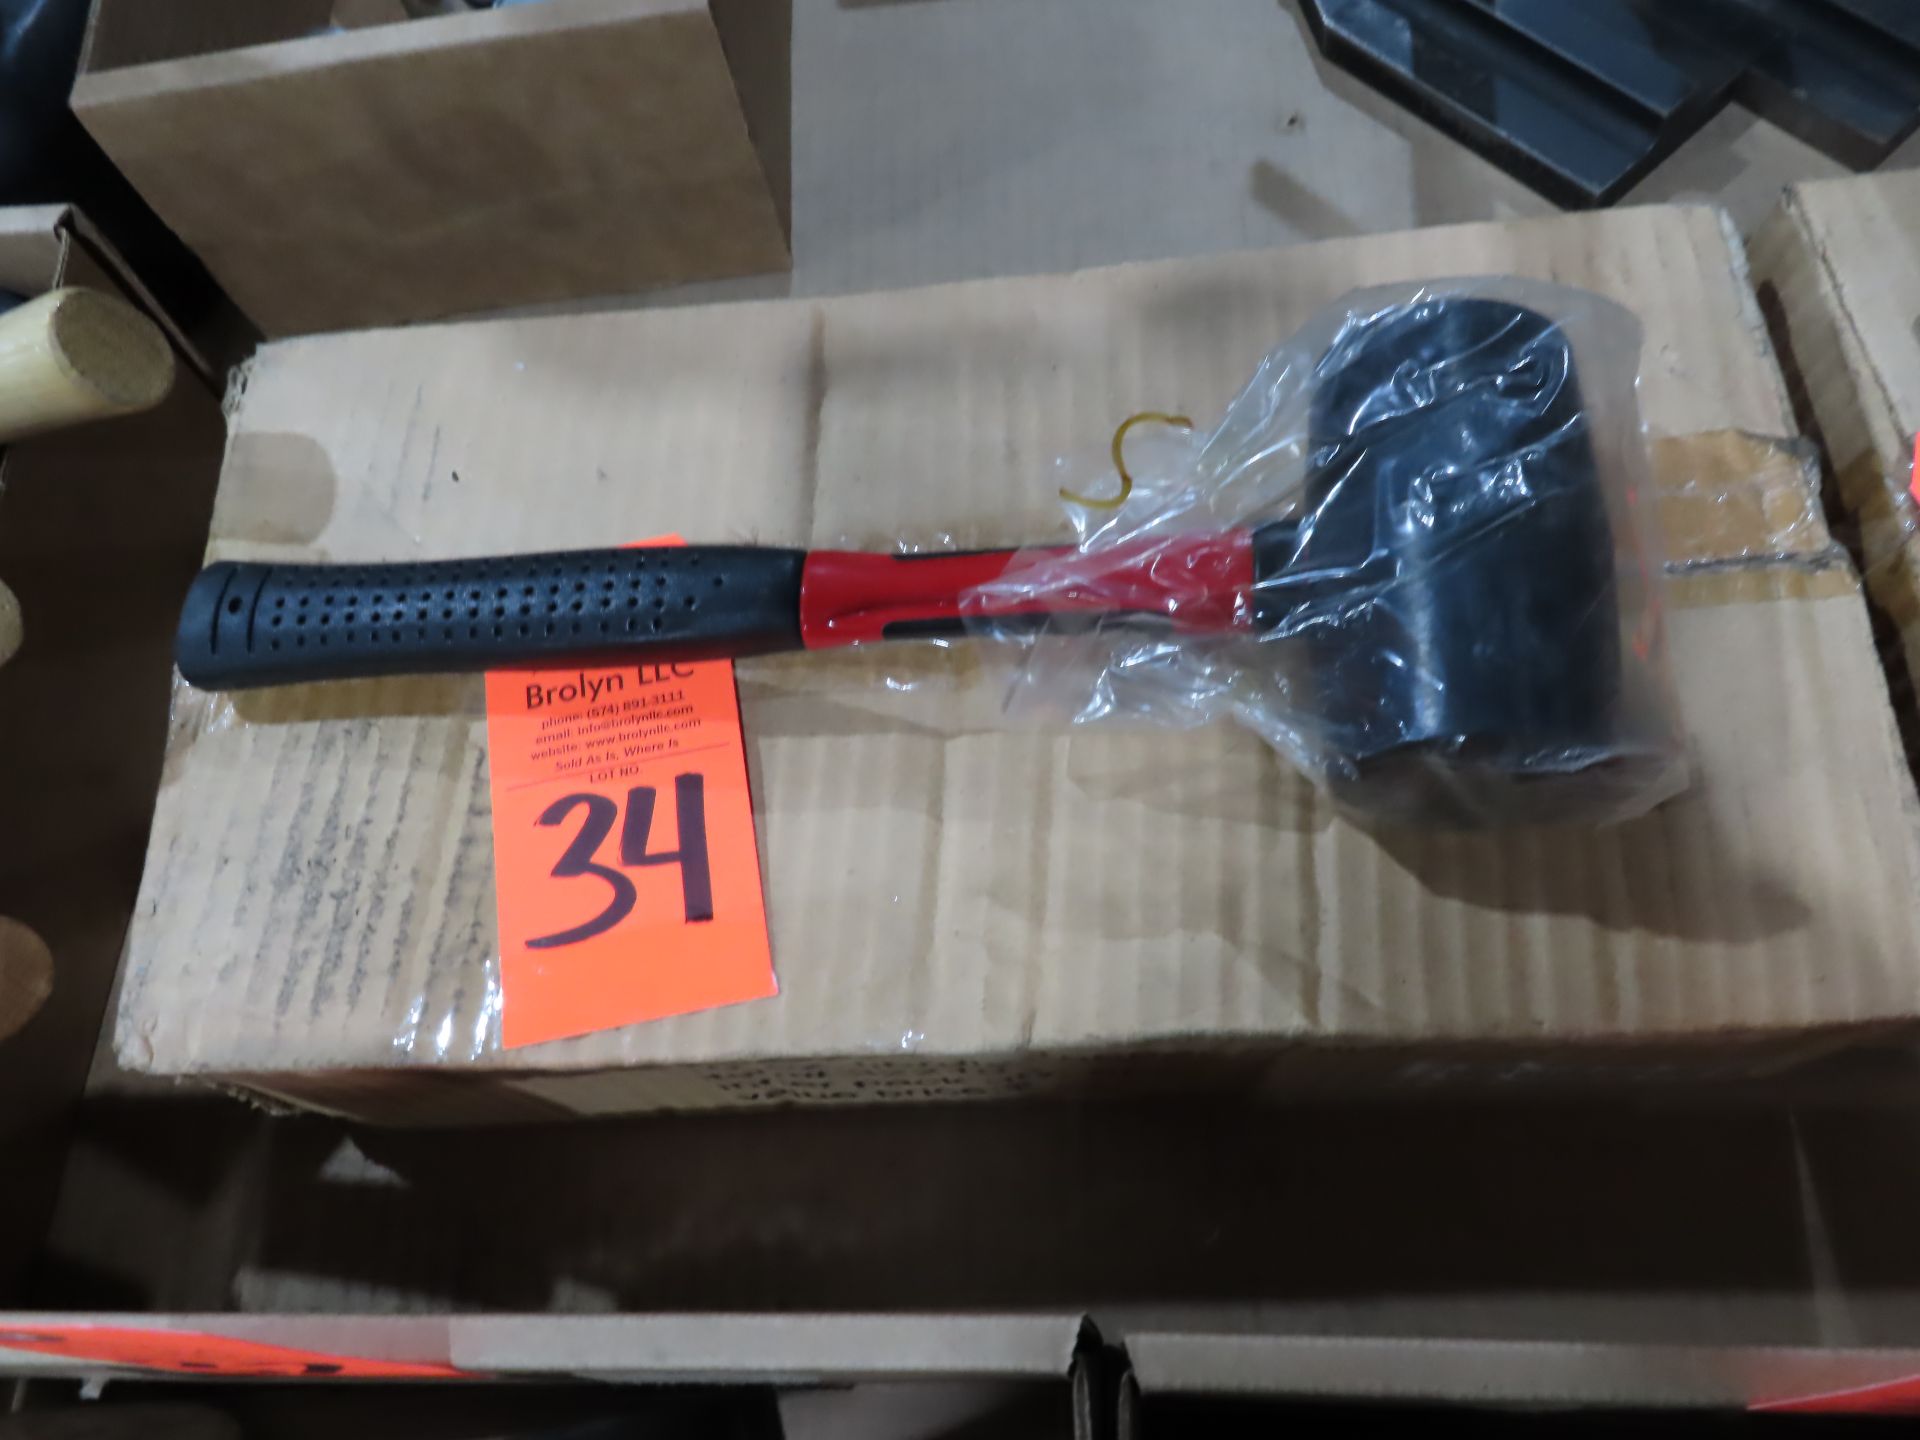 Qty 6 rubber mallets. (new in box) This item can be picked up onsite with no loading fee. Should you